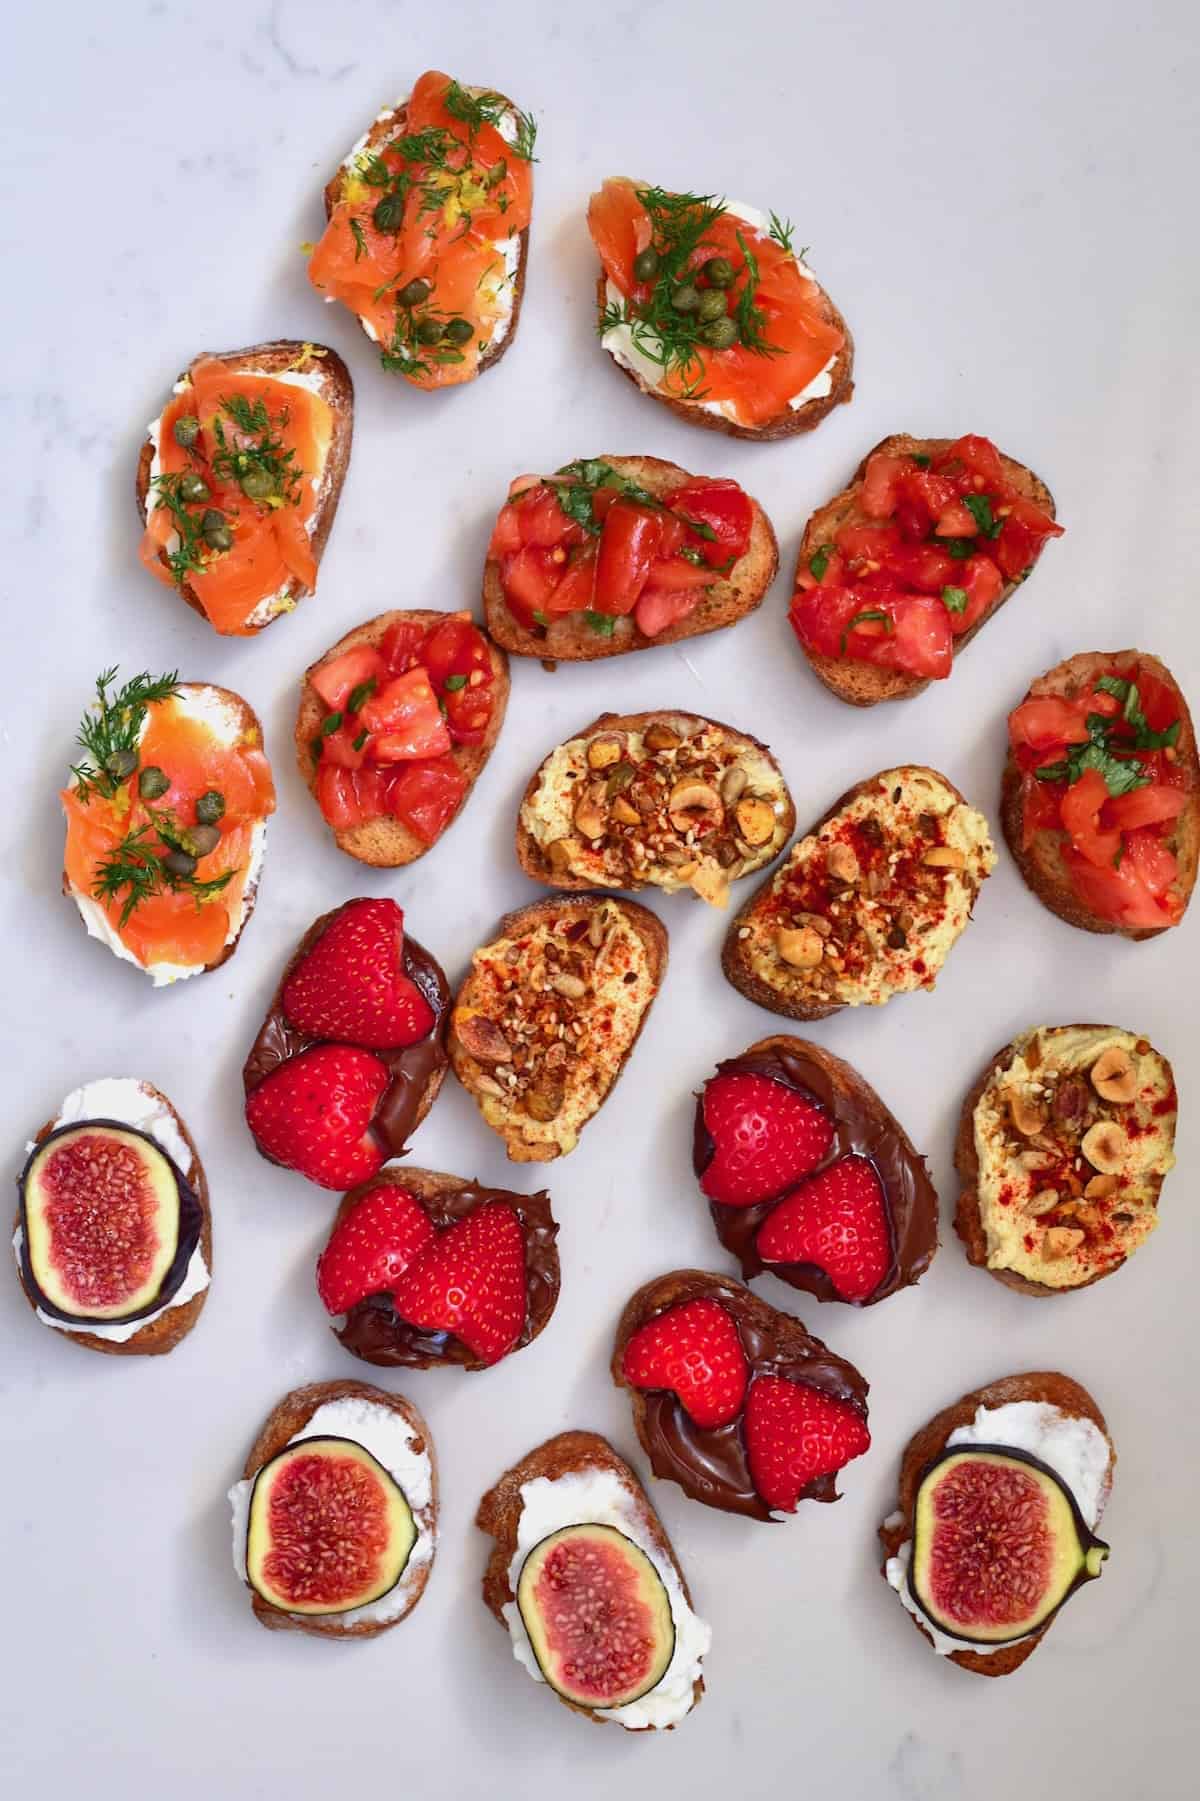 Different toppings on homemade crostini dried bread